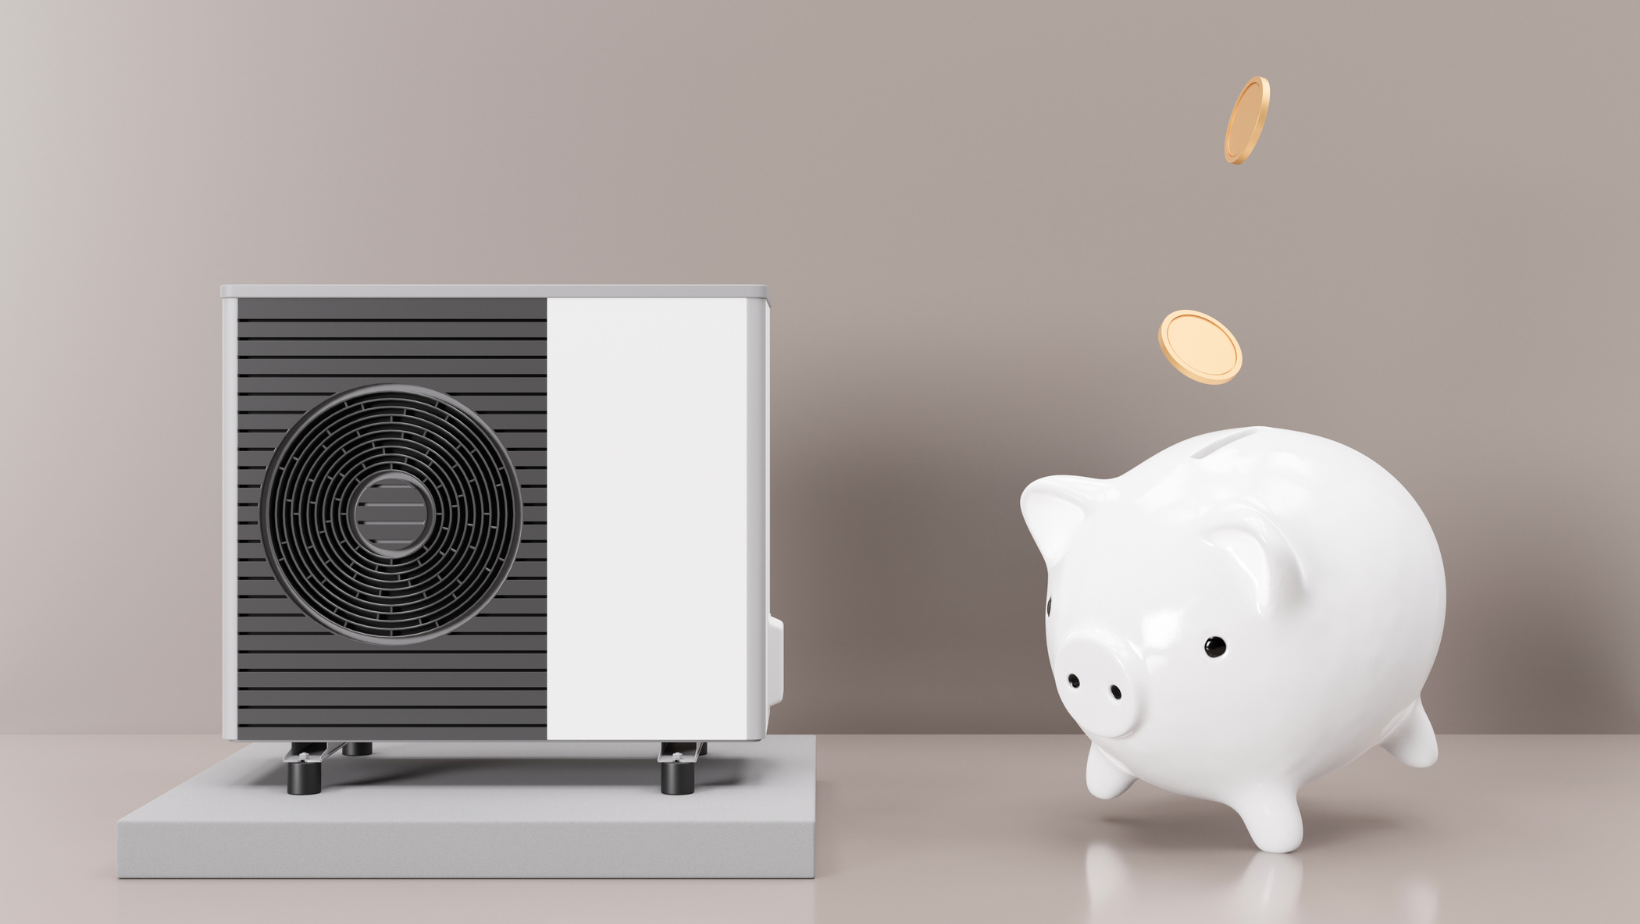 A heat pump and piggy bank with falling coins